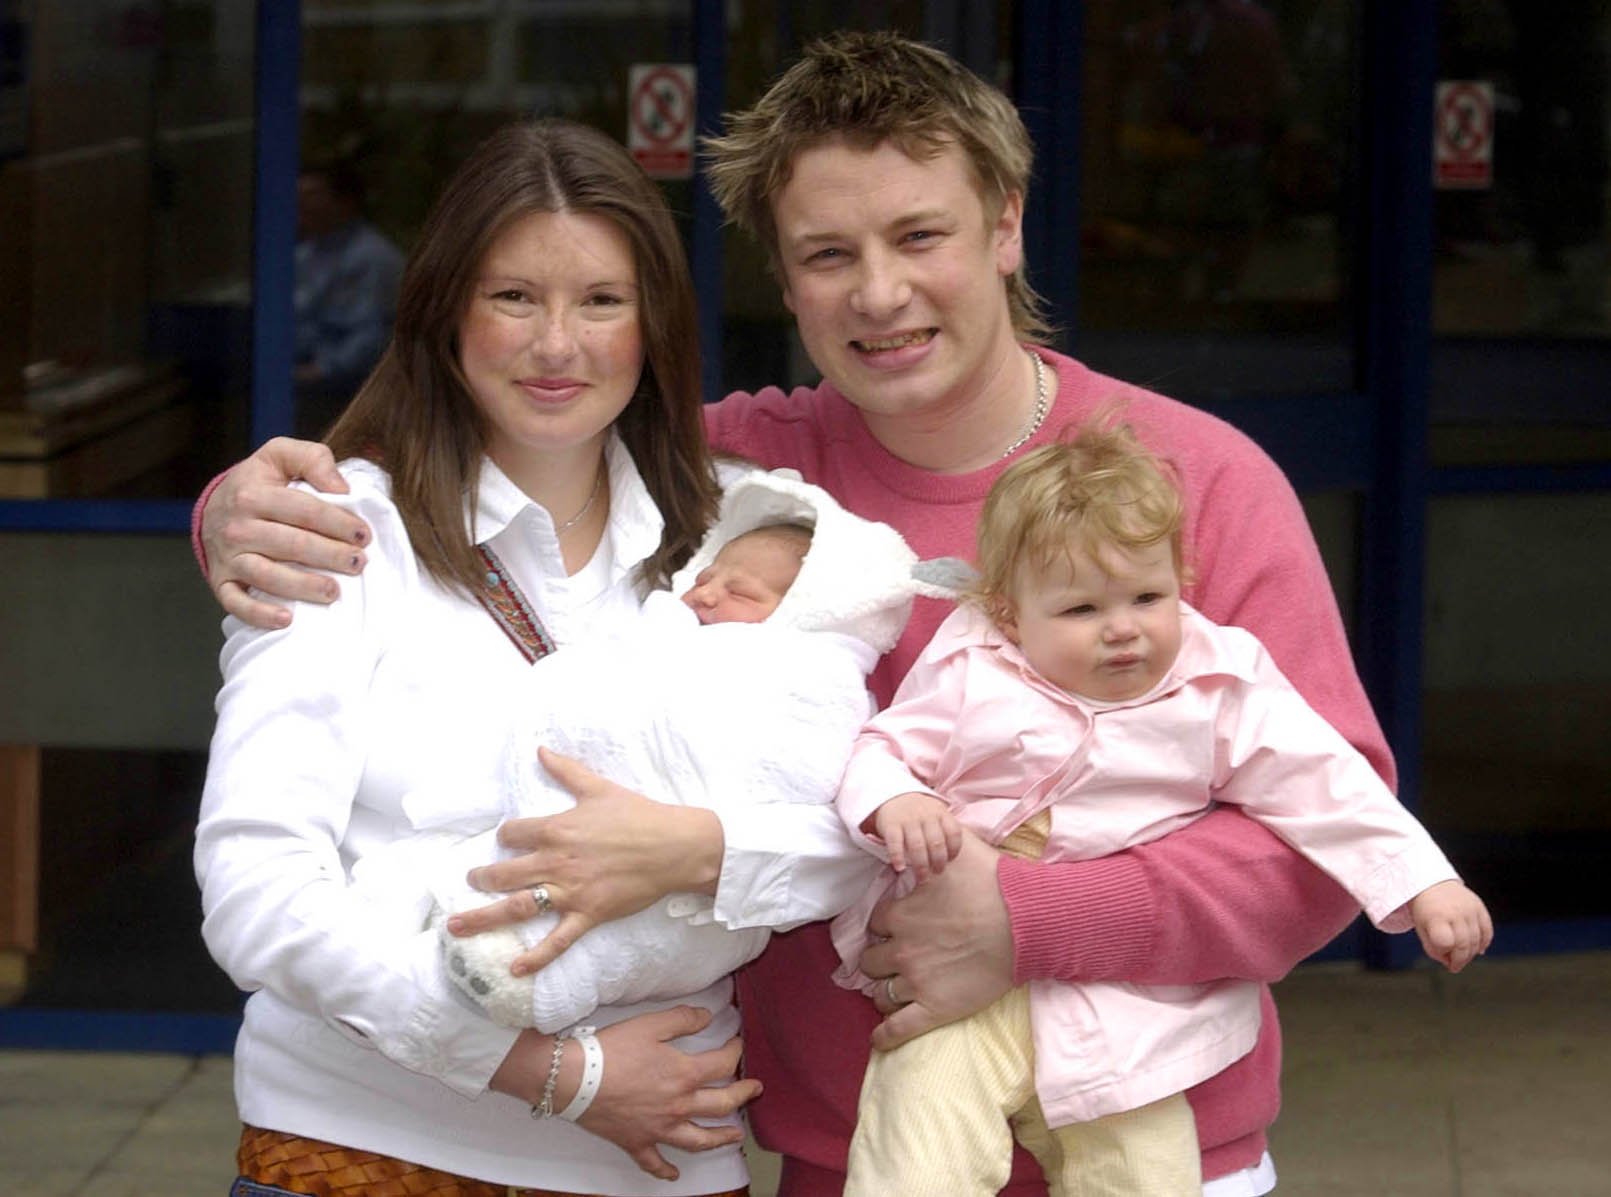 Jamie and Jools pictured in 2003 with their daughters Daisy Boo and Poppy Honey